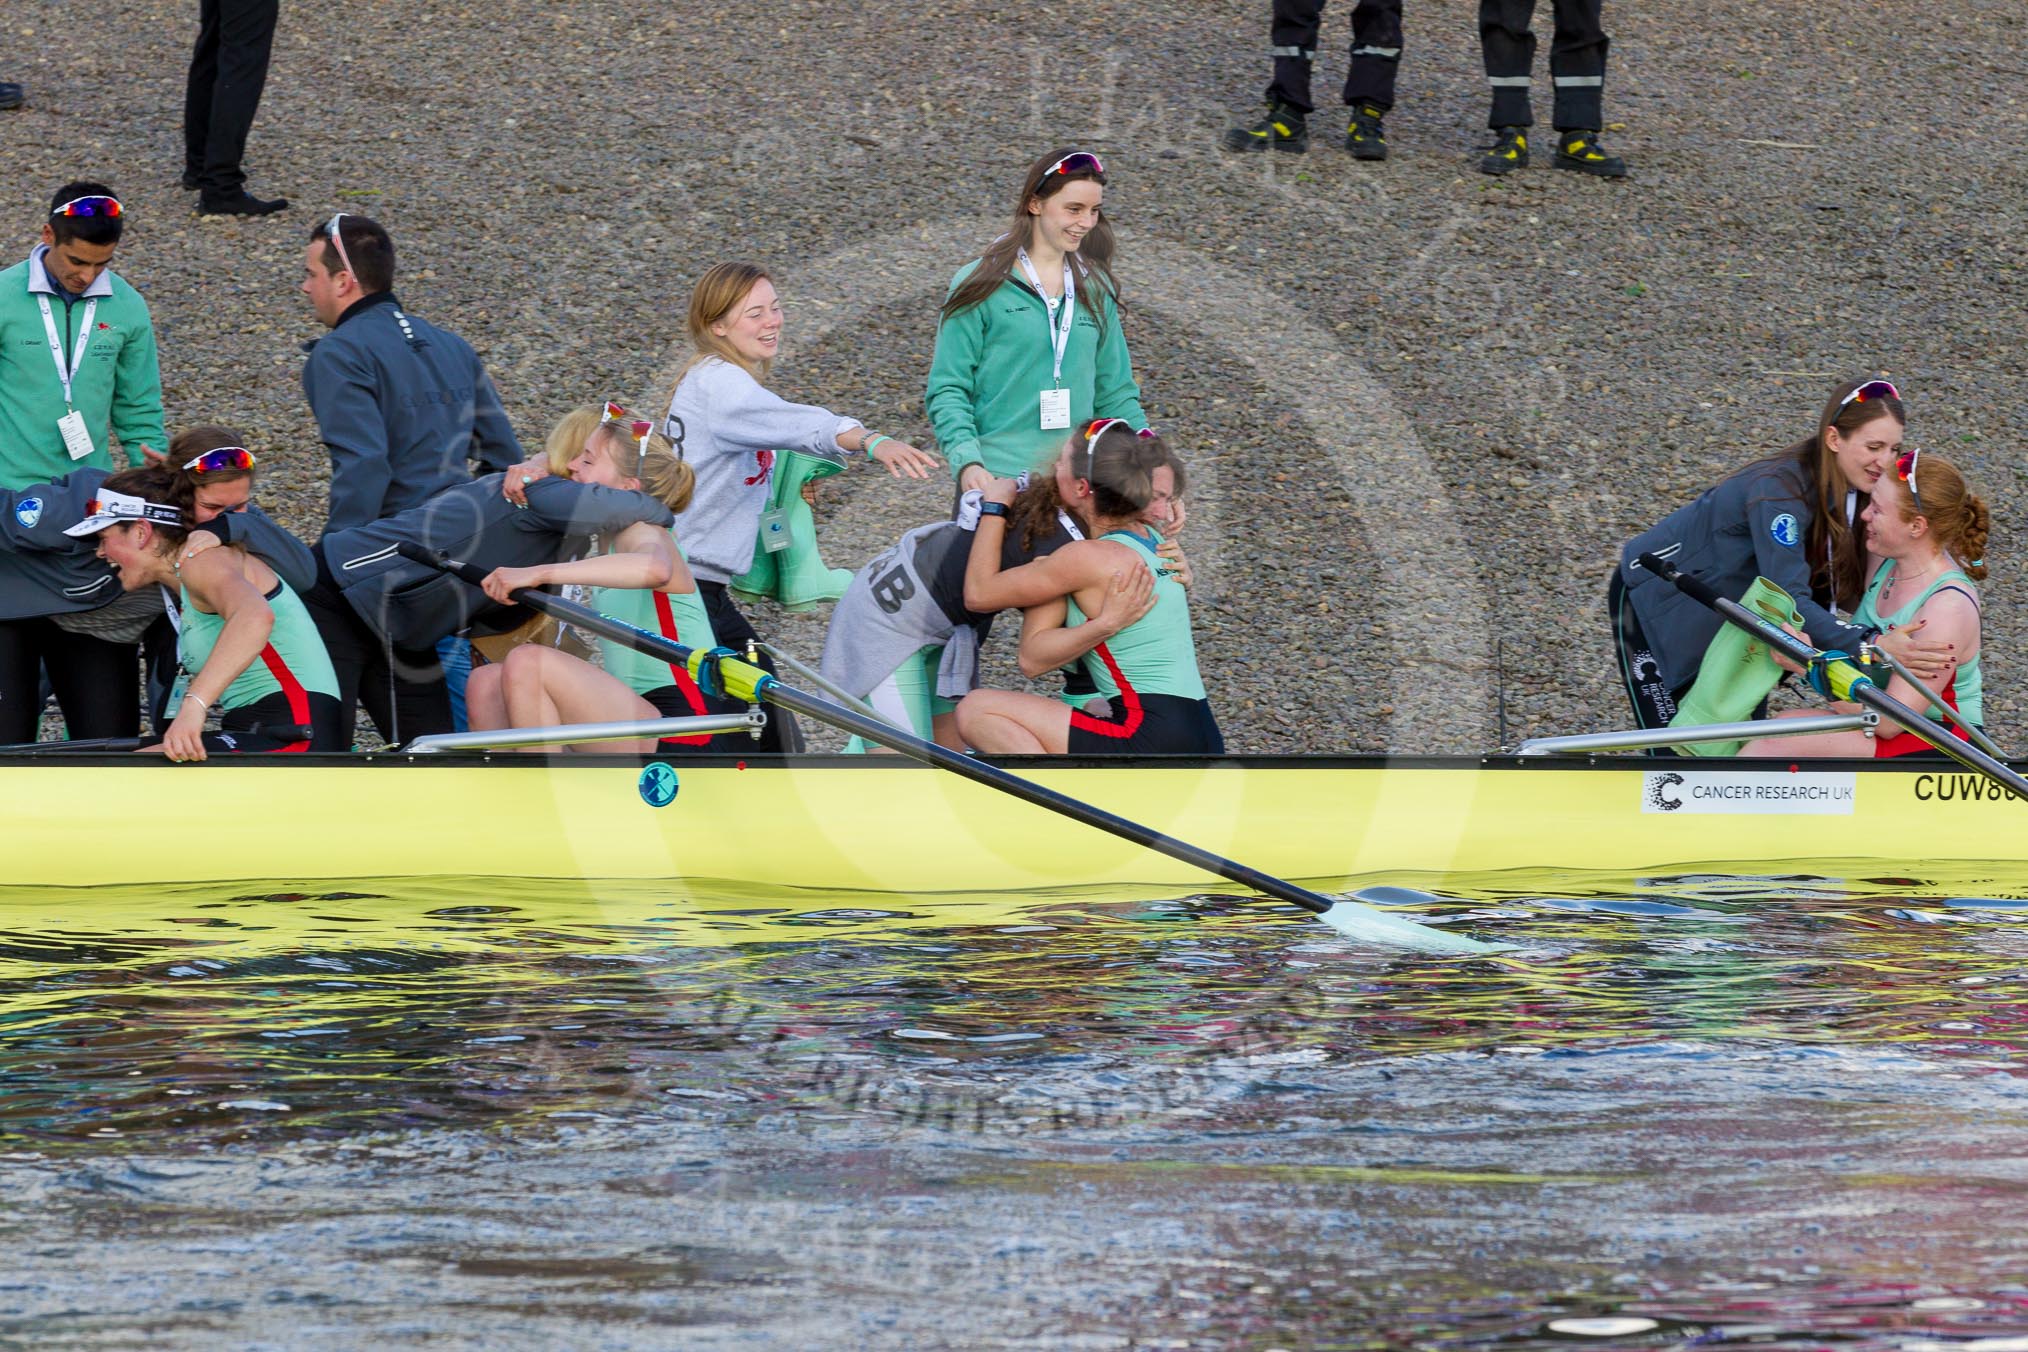 The Boat Race season 2017 -  The Cancer Research Women's Boat Race: CUWBC acelebrating after having won the Women's Boat Race.
River Thames between Putney Bridge and Mortlake,
London SW15,

United Kingdom,
on 02 April 2017 at 16:58, image #195